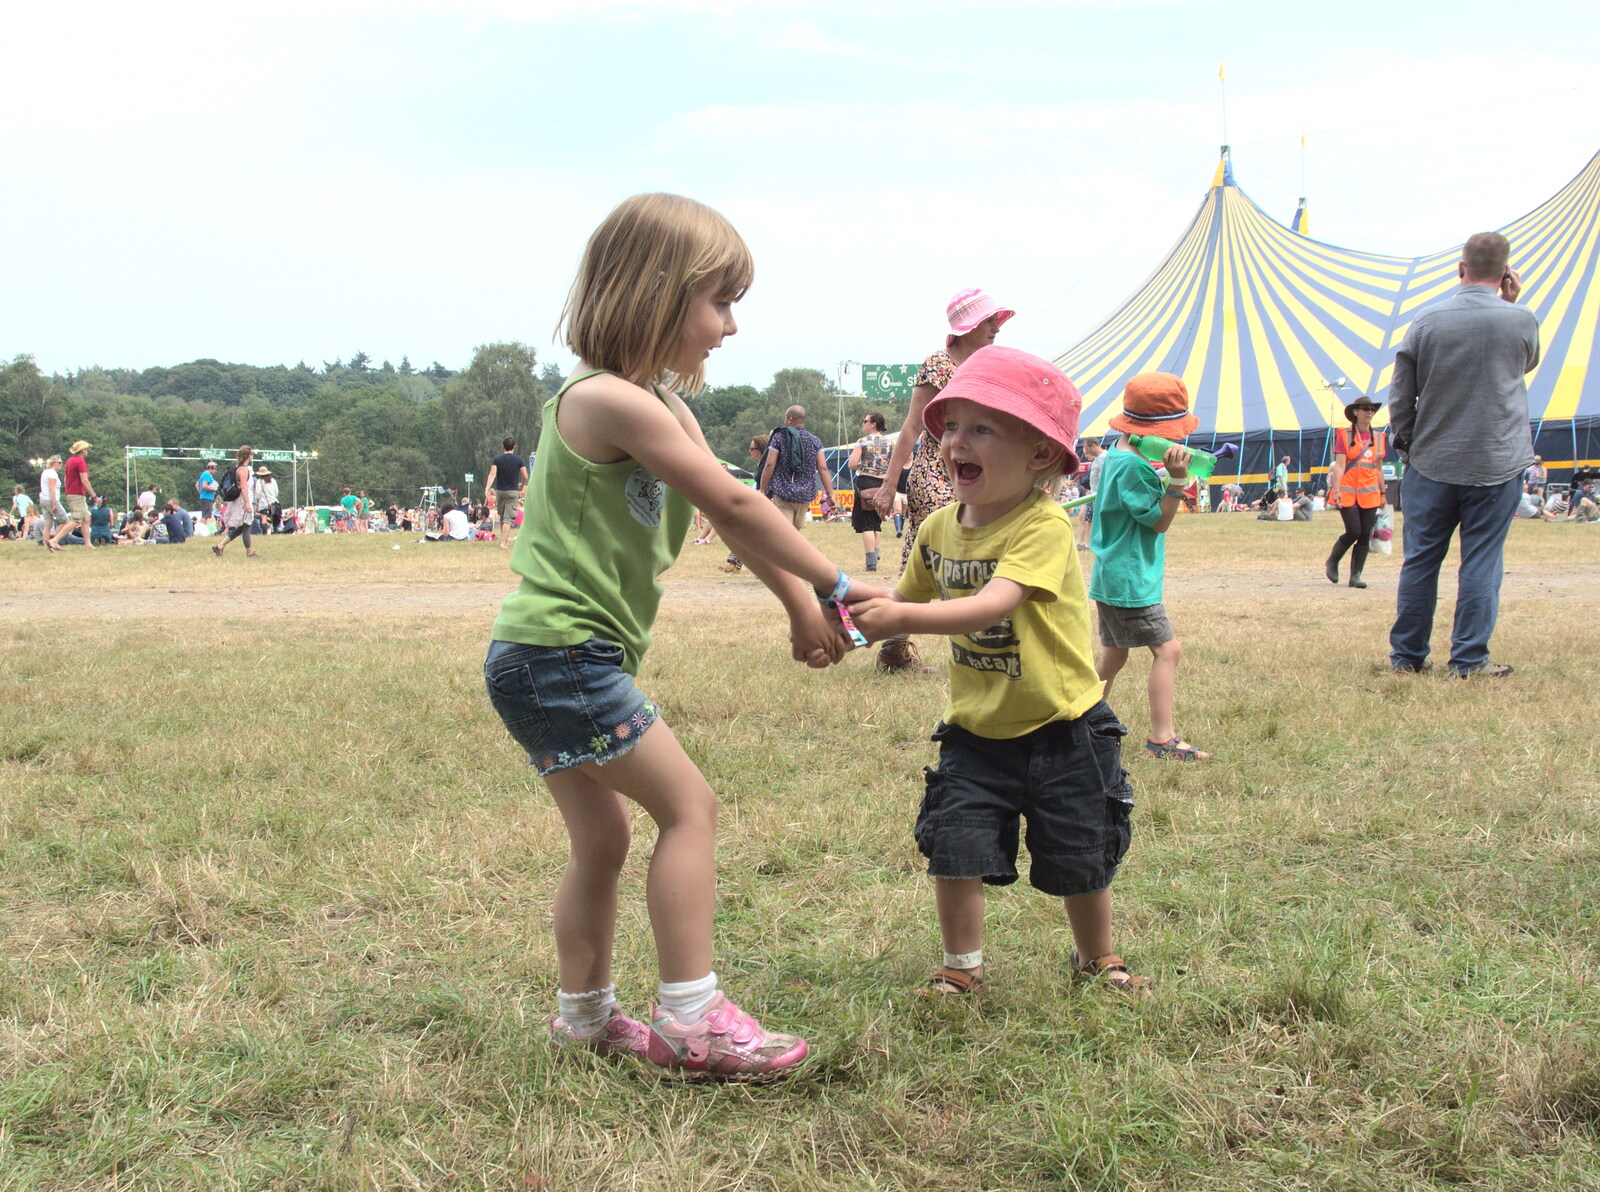 Sophie and Harry dance around from Latitude Festival, Henham Park, Southwold, Suffolk - 17th July 2014